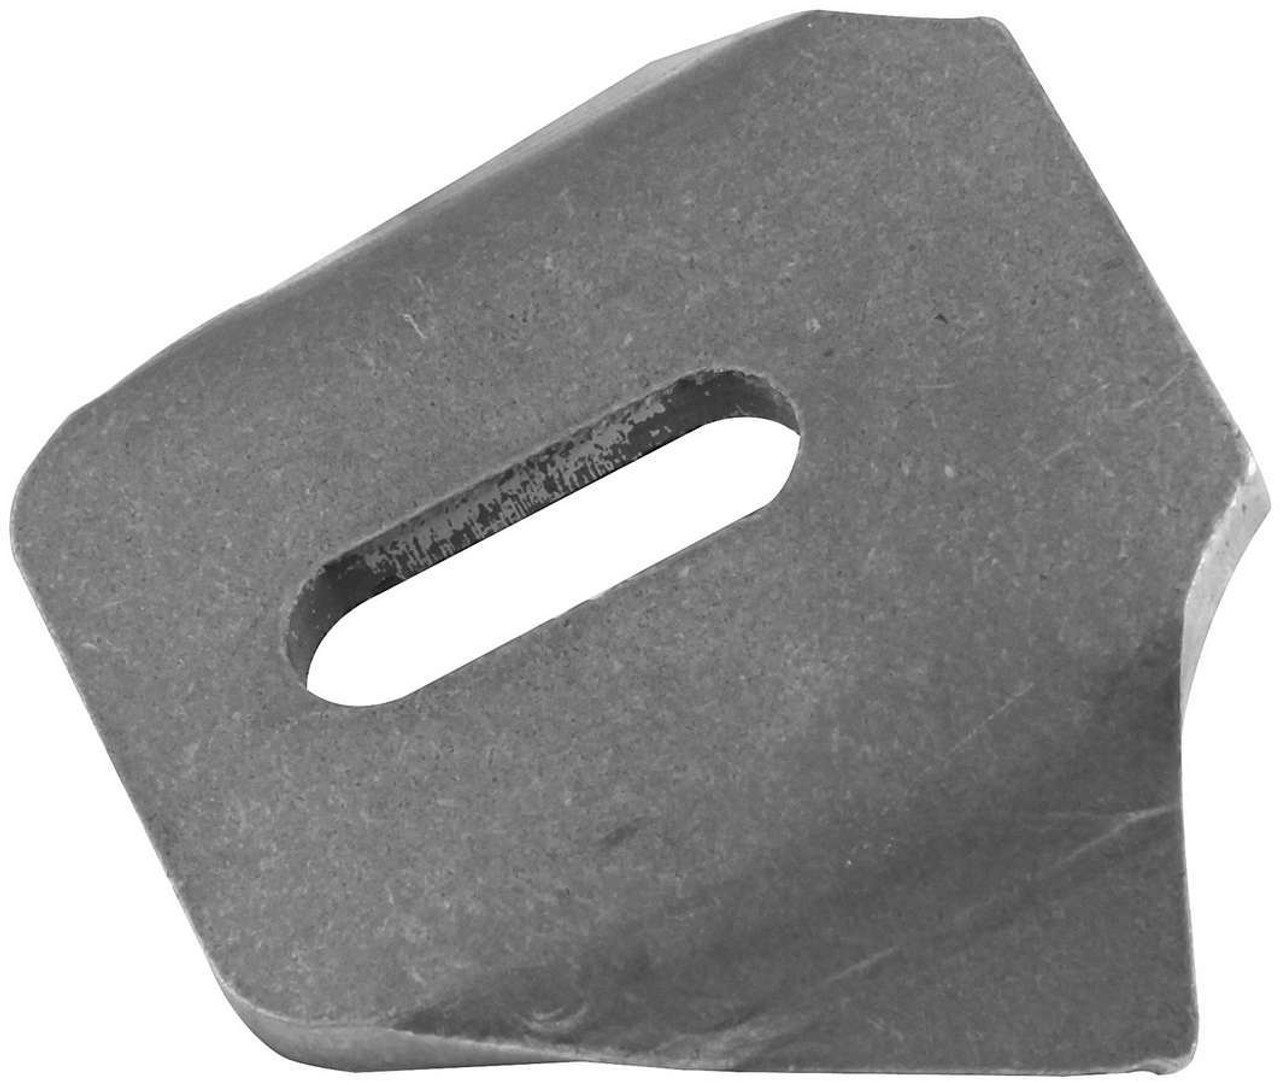 CHASSIS TAB, BODY BRACE, SLOTTED - 4PK